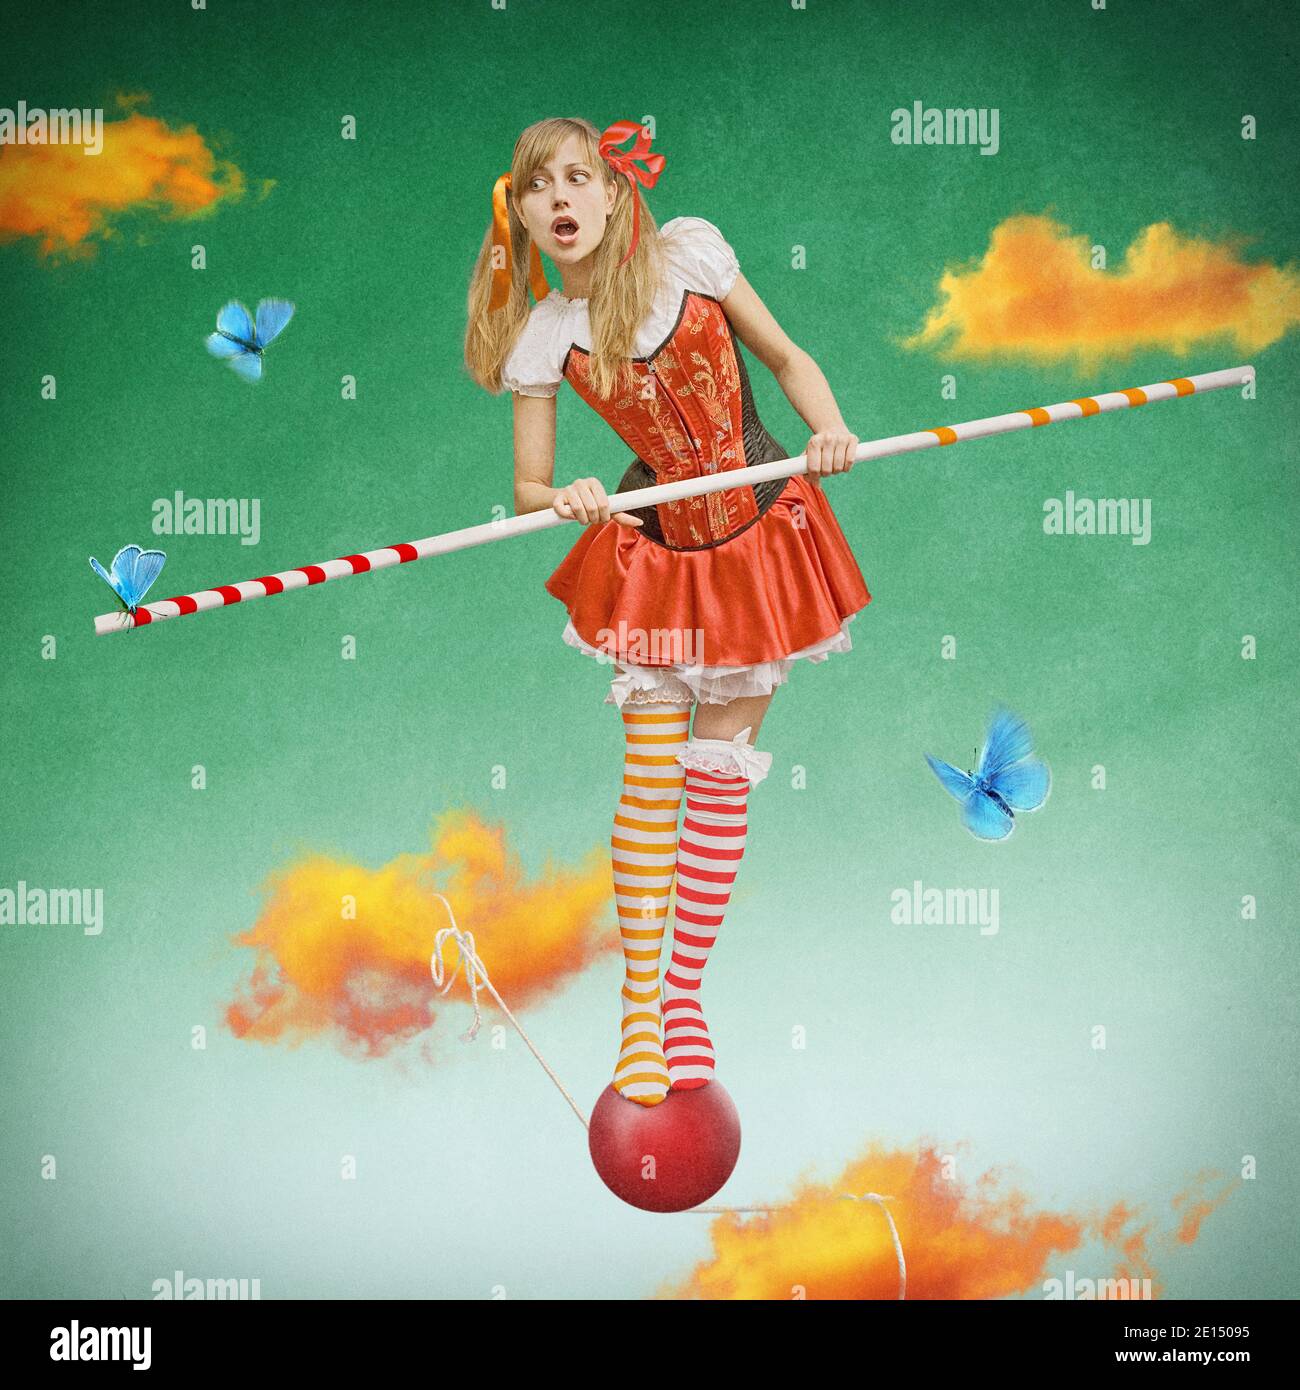 surreal fairy tale artwork, circus girl balancing on a rope in the sky, beautiful model and fantasy background Stock Photo